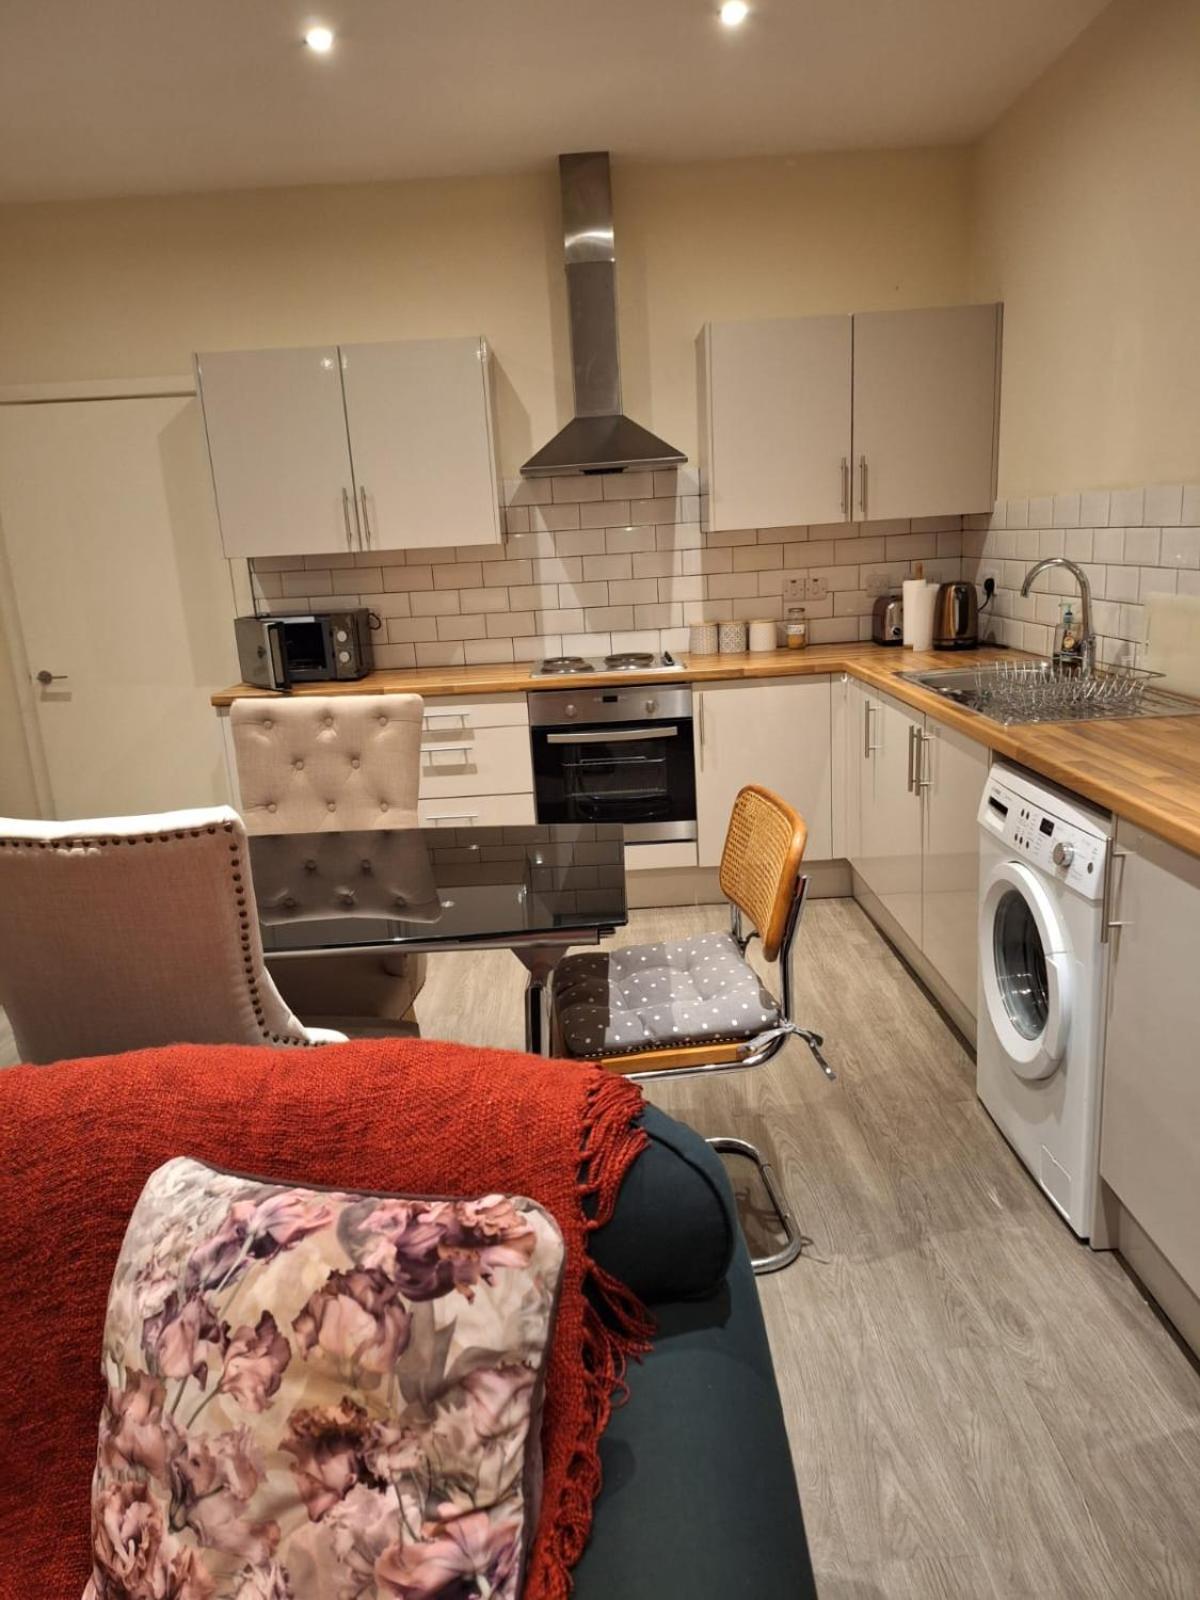 Fabulous Home From Home - Central Long Eaton - Lovely Short-Stay Apartment - High Speed Fibre Optic Broadband Internet - High Speed Streaming Possible Suitable For Working From Home And Students Very Spacious Free Parking Nearby Exterior photo